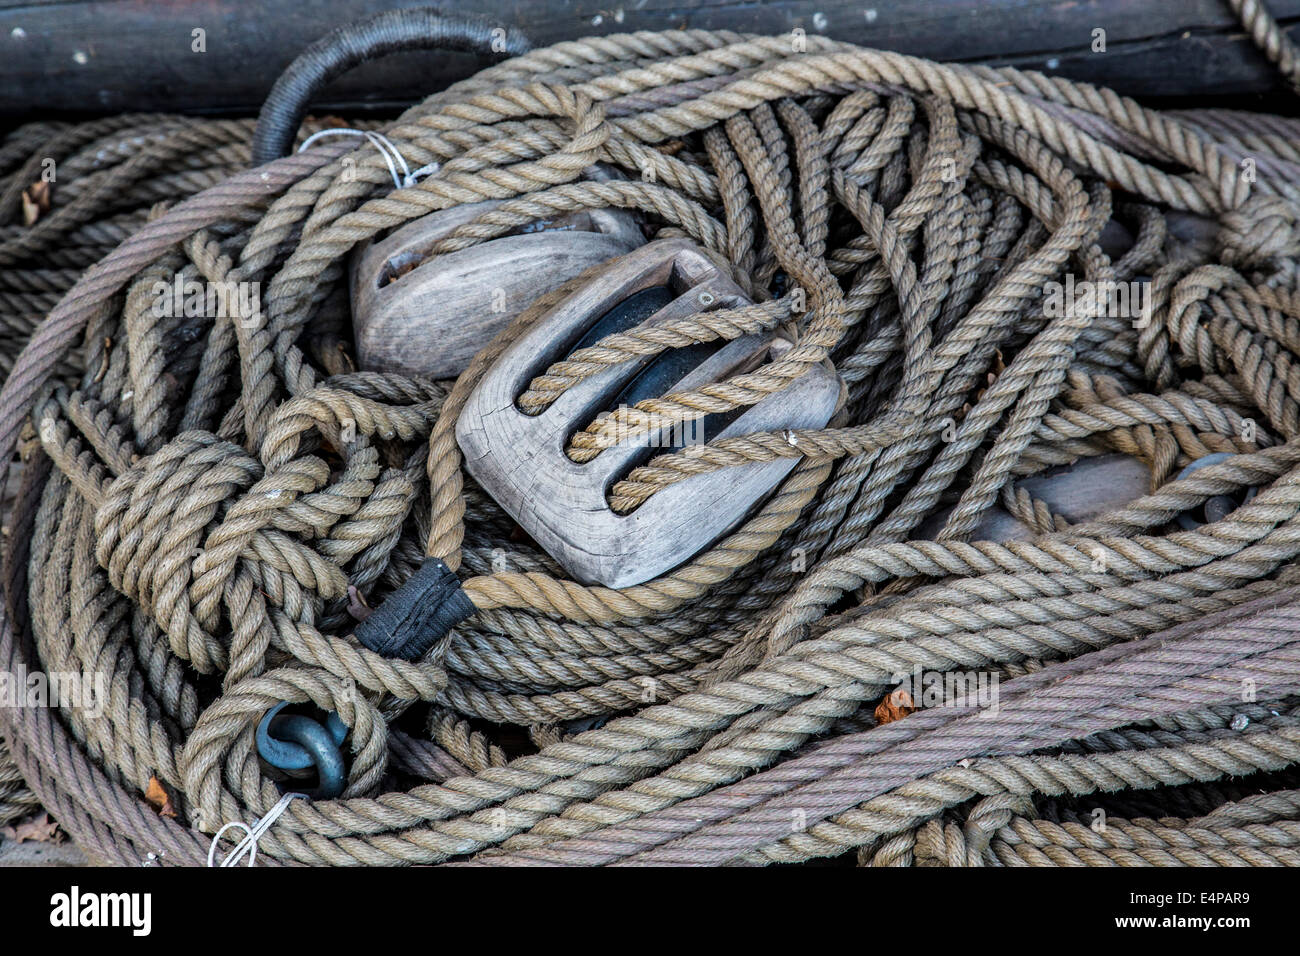 Cordage, ropes, on an old wooden sailboat, Stock Photo